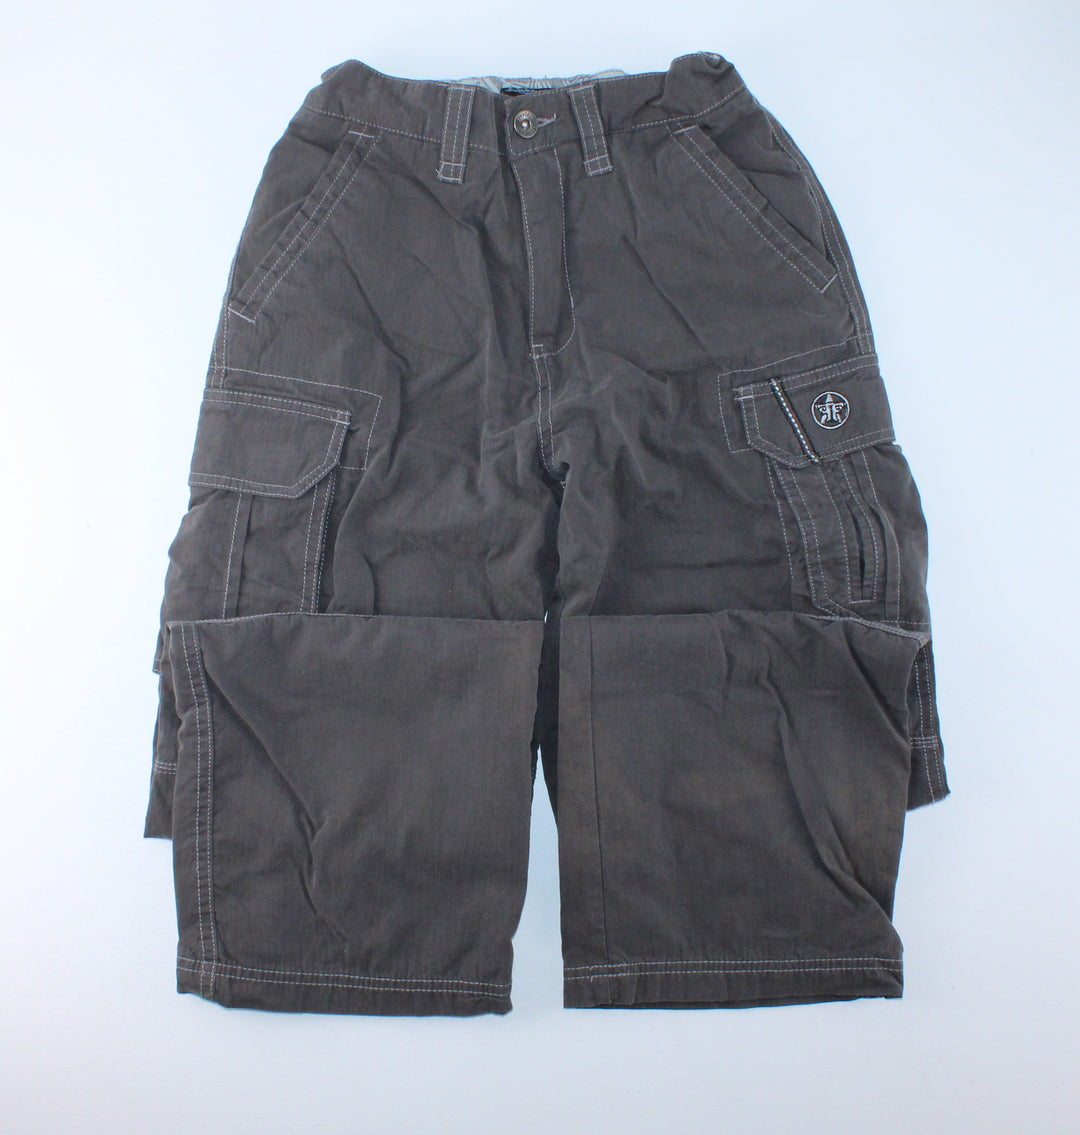 FREE FALL JERSEY LINED PANTS 10Y VGUC/EUC